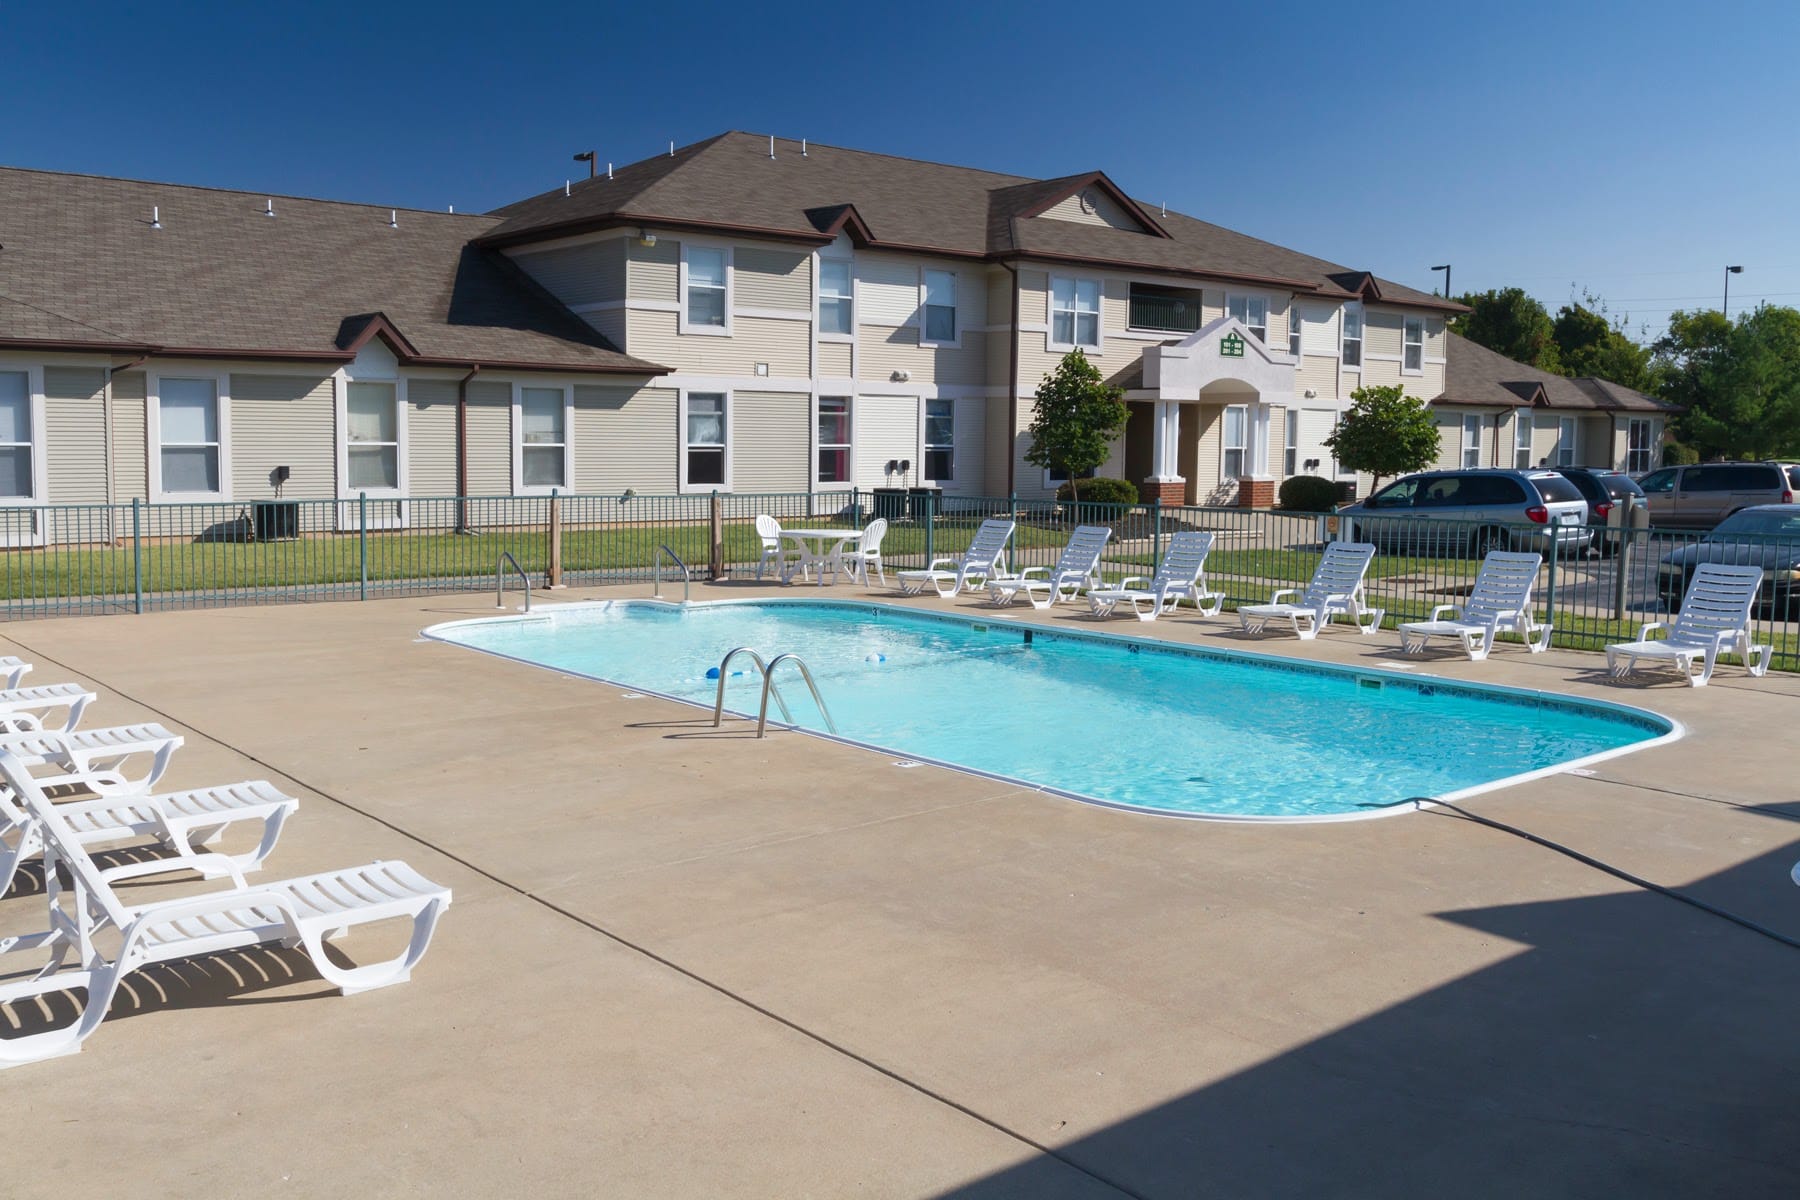 Chesterfield Village Apartments - Springfield (MO 65807), US, apartment complex